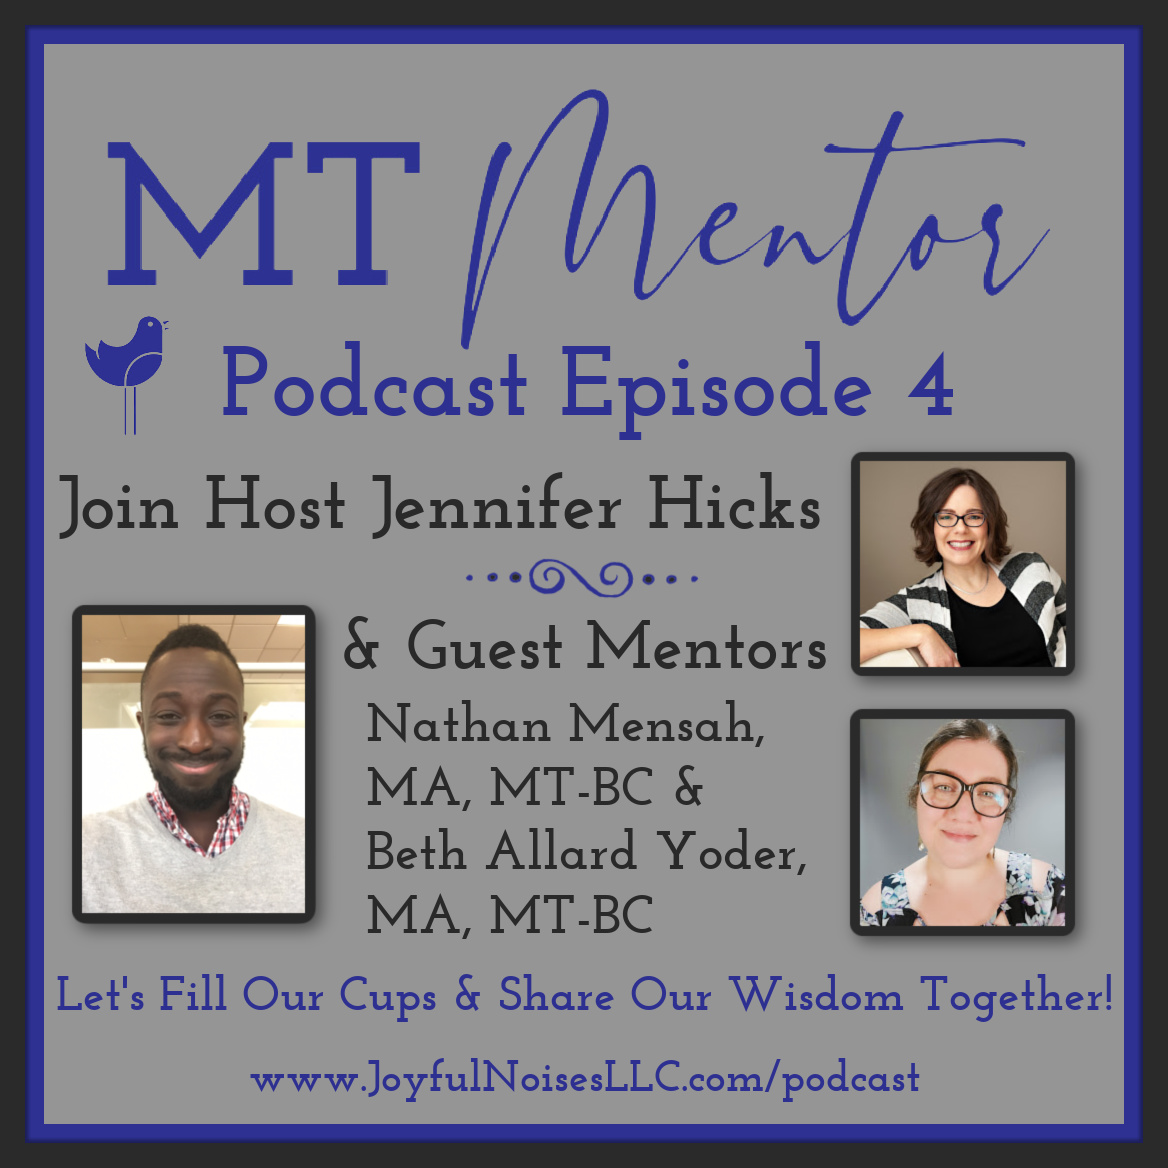 Headshots of host Jennifer Hicks and guest mentors Beth Allard Yoder and Nathan Mensah plus the podcast title, tagline, and web address